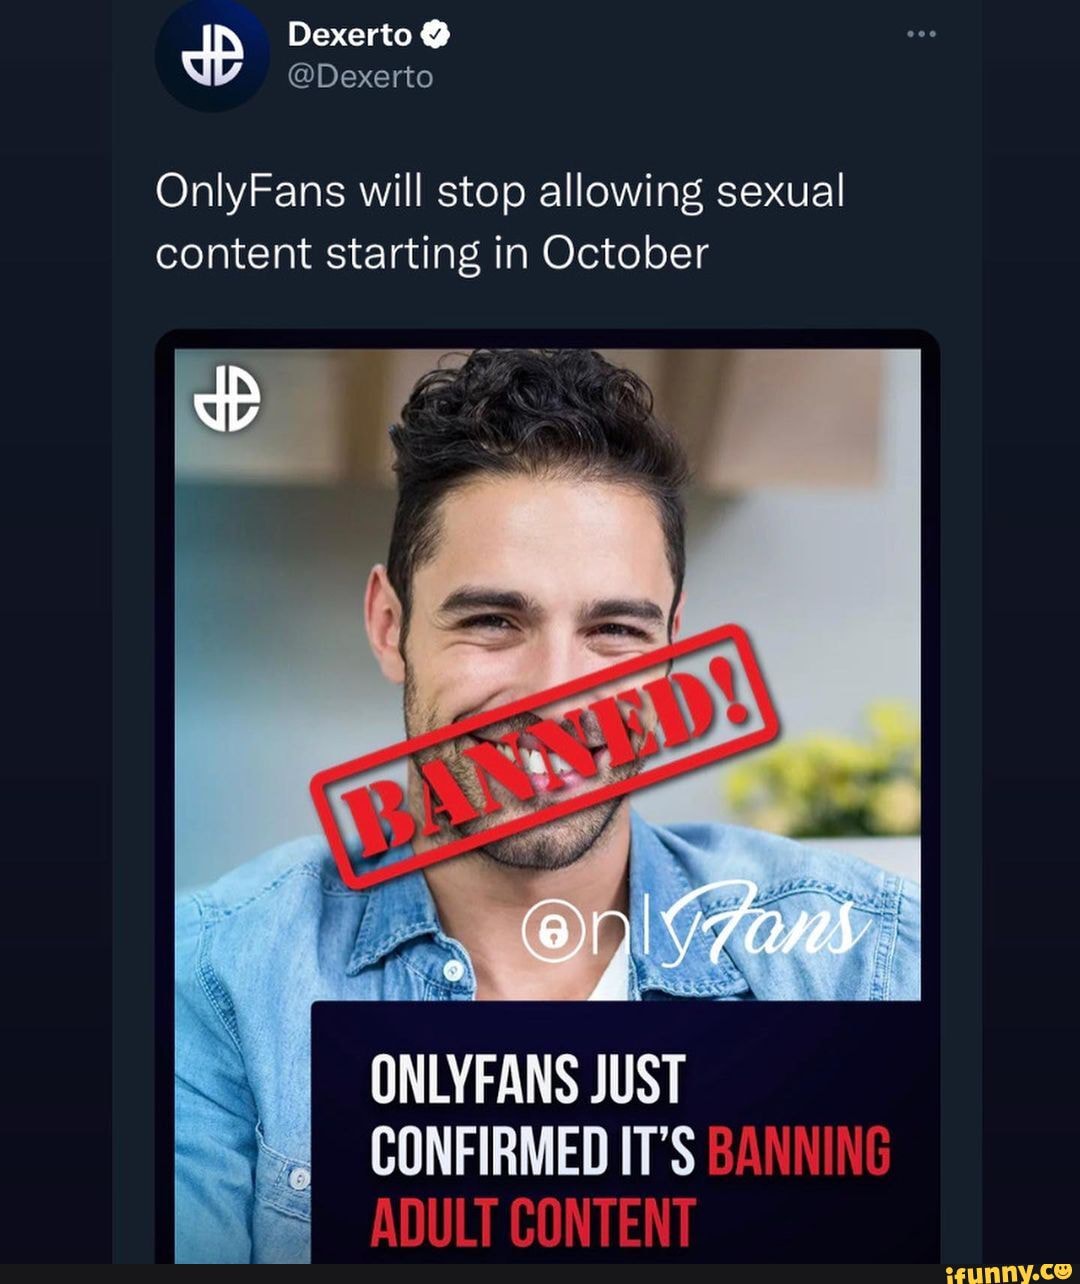 Onlyfans Announces That It Is Going To Stop Allowing Adult Content